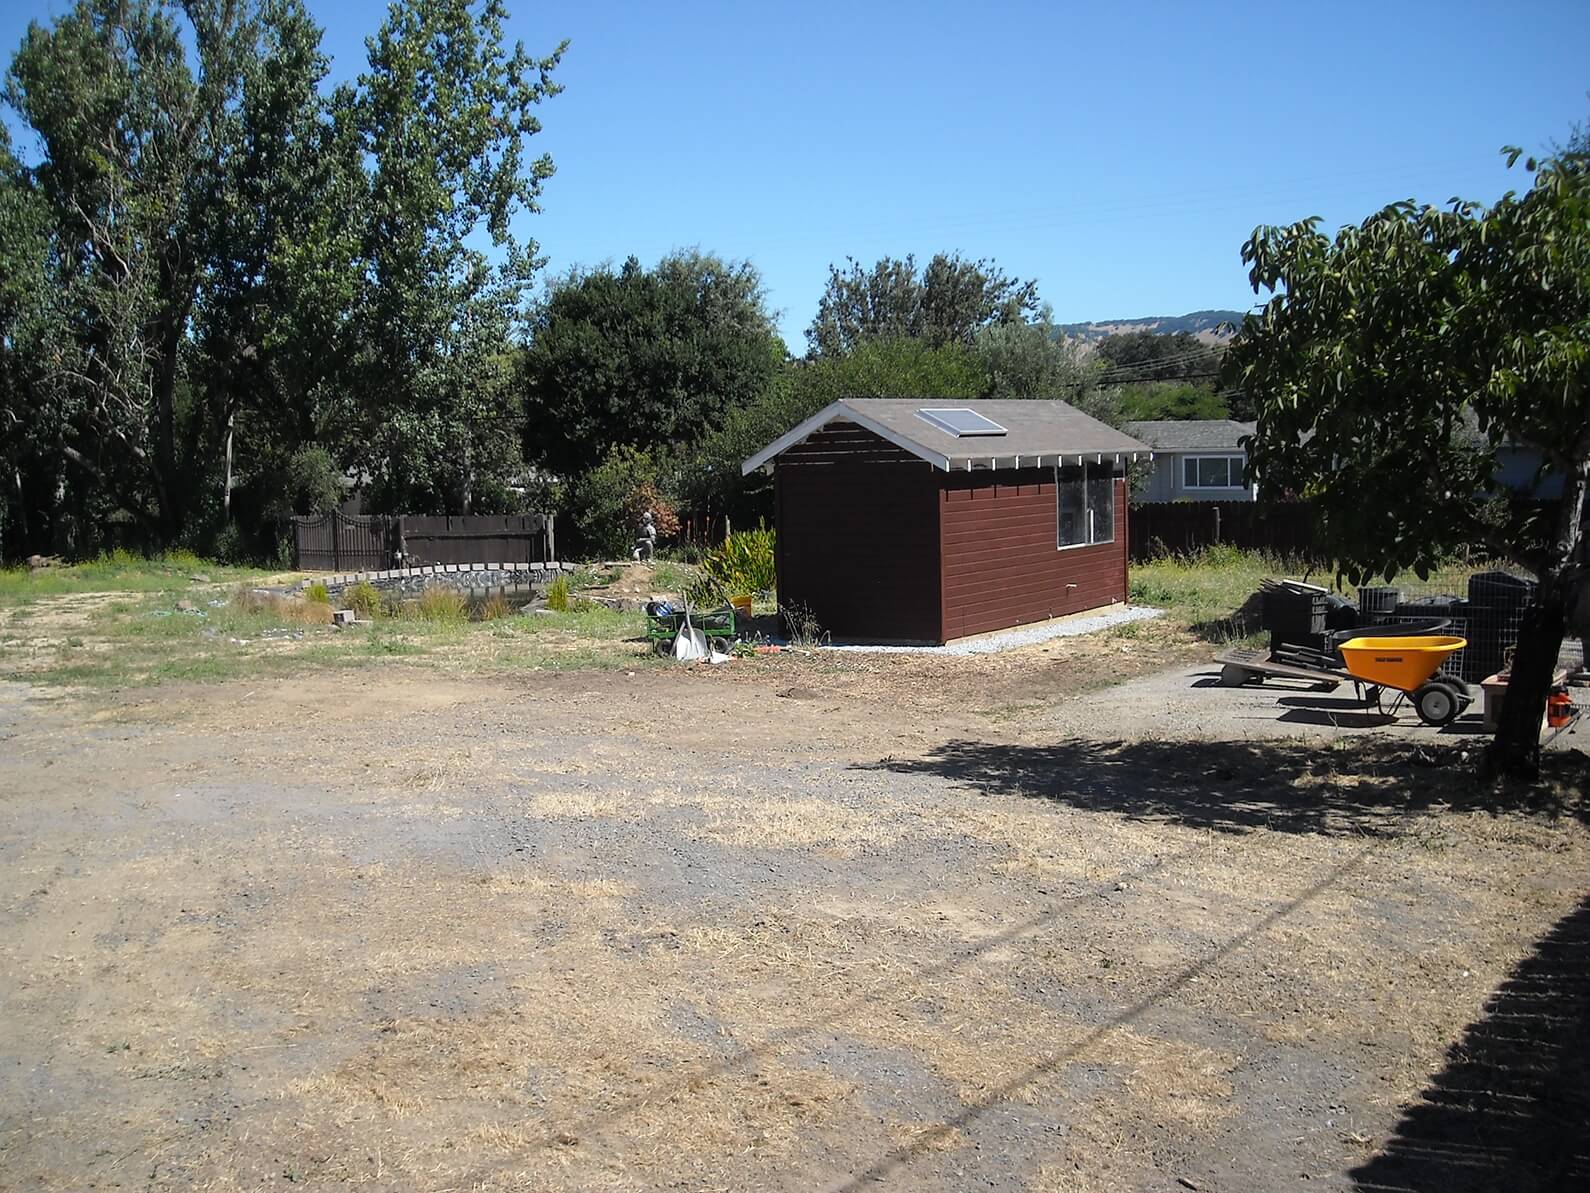 August 2019. The well house, newly painted, and a lot of bare ground.